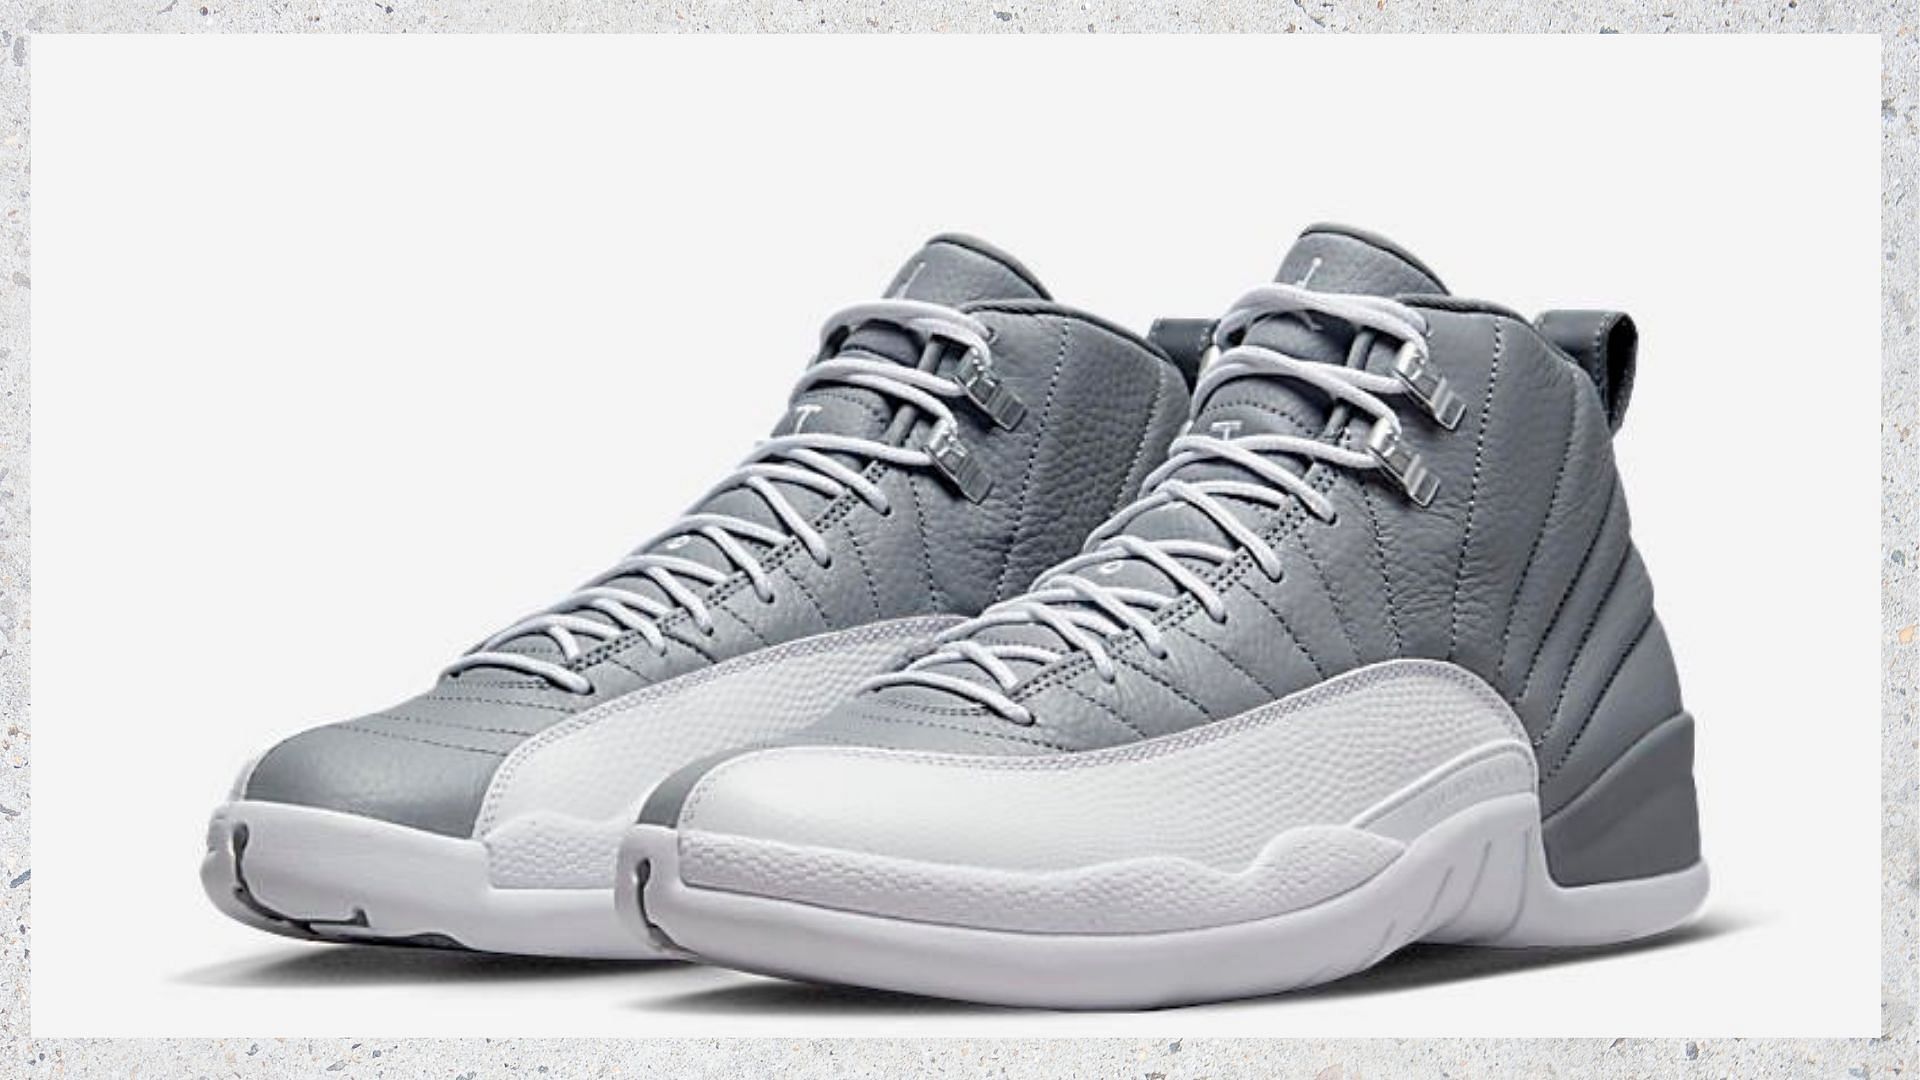 Air Jordan 12 Stealth shoes will arrive later in 2022 (Image via Nike)